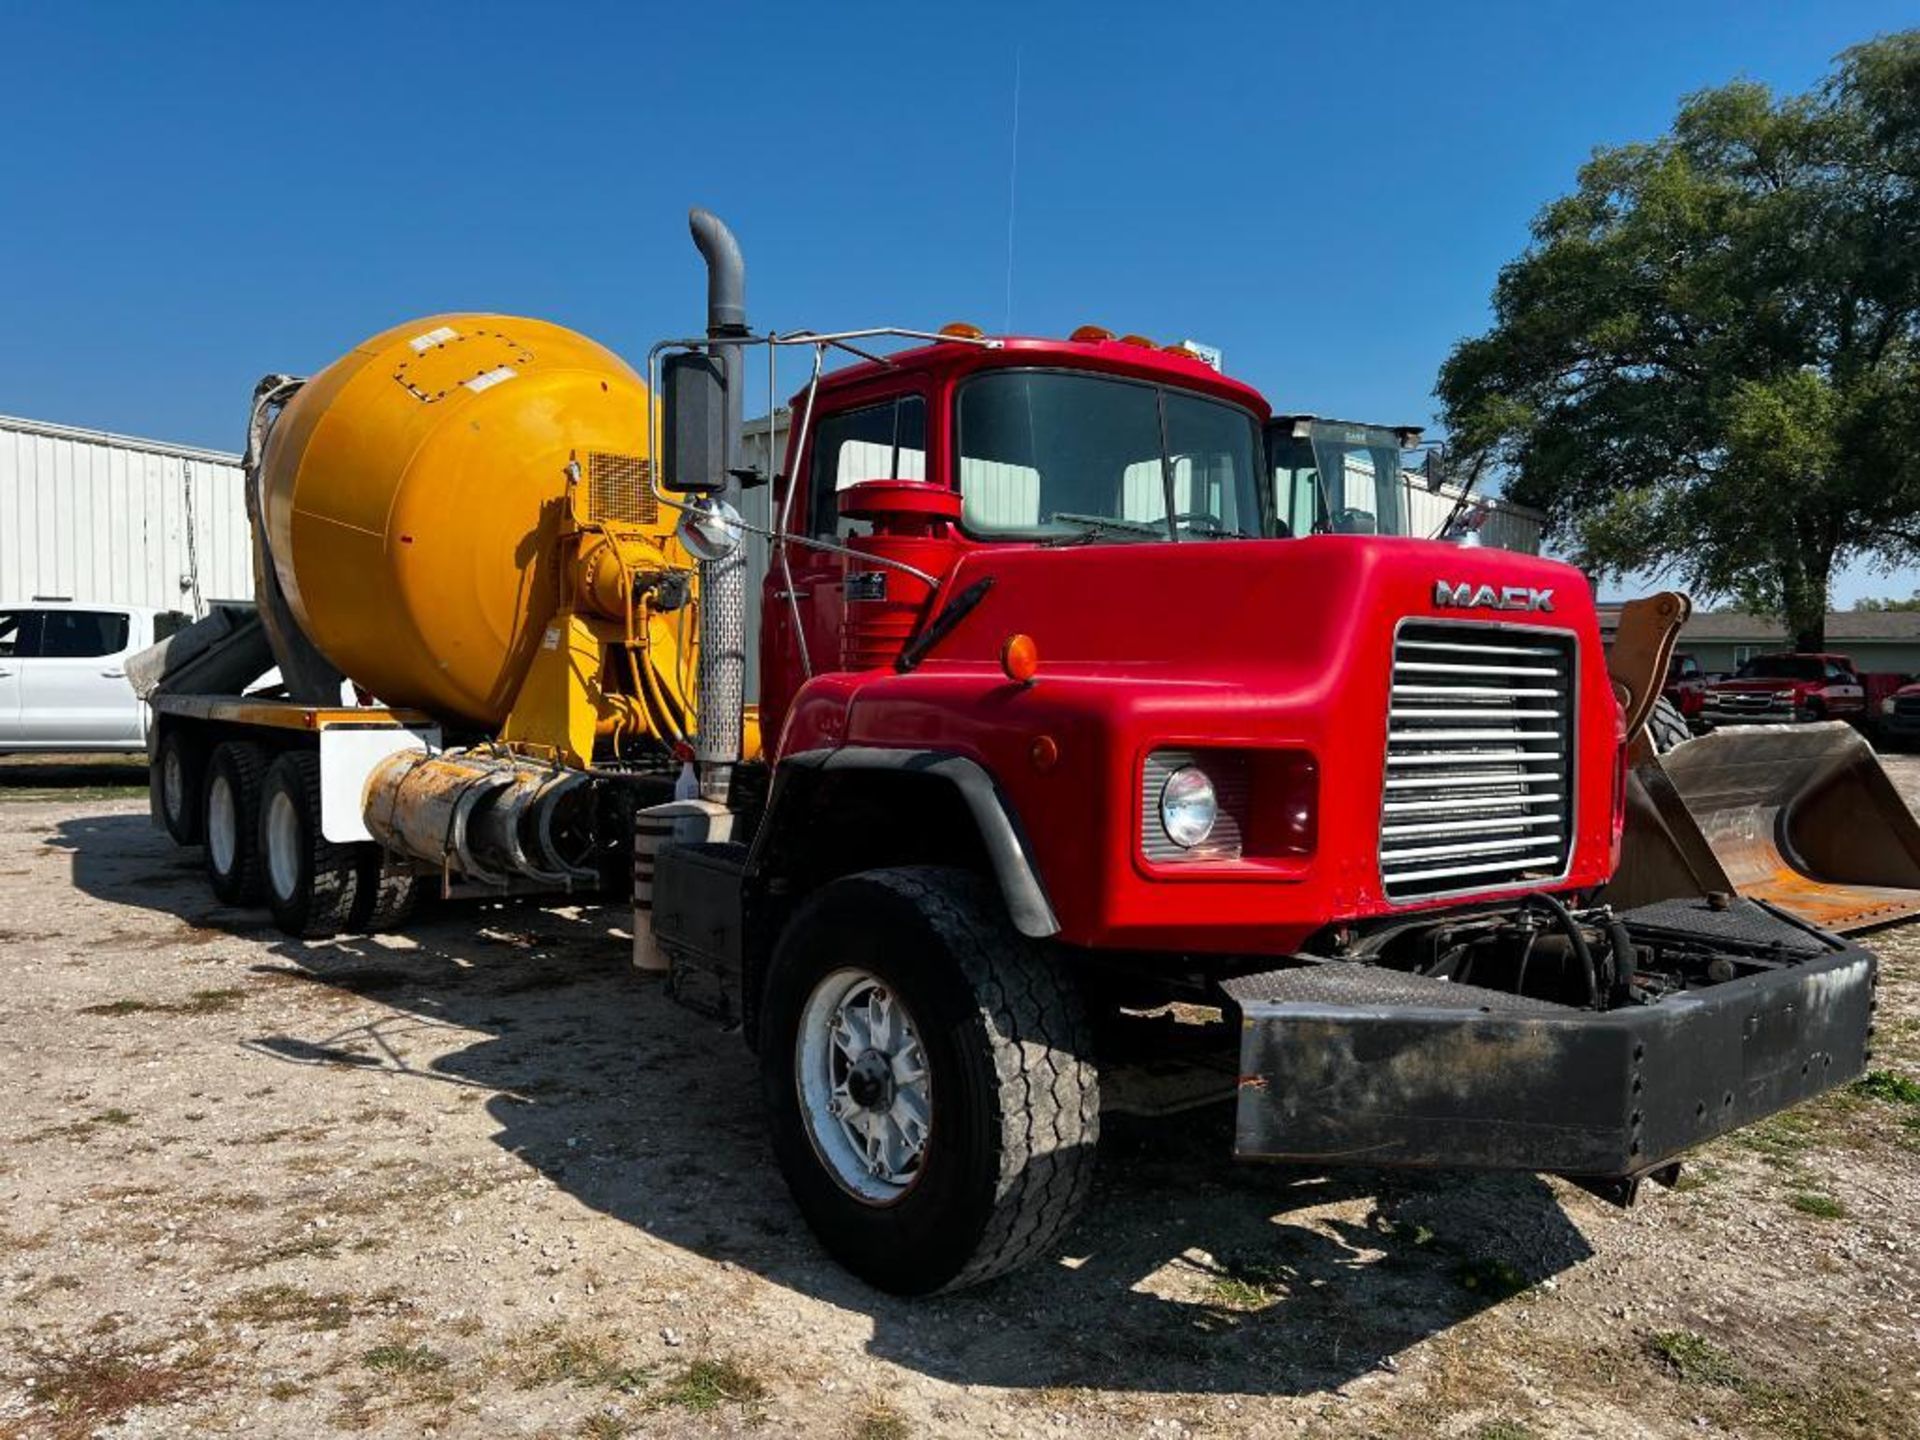 2000 Mack DM690S Concrete Mixer Truck, miles showing: 22,108, hours showing: 1,679, Maxitorque T2070 - Image 2 of 36